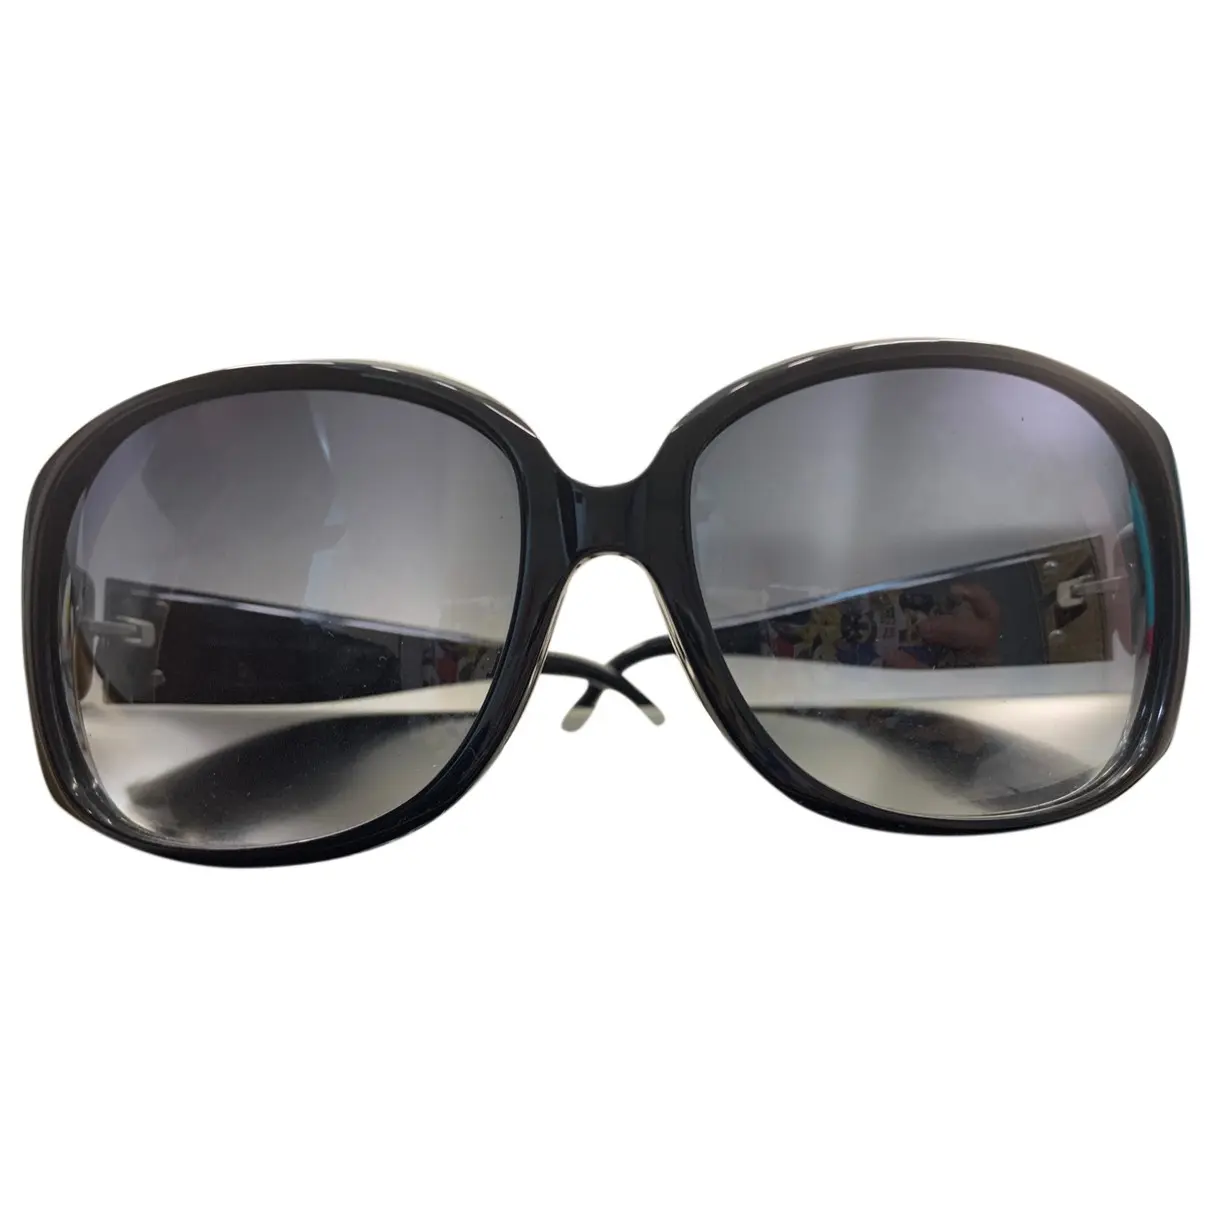 Sunglasses Marc by Marc Jacobs